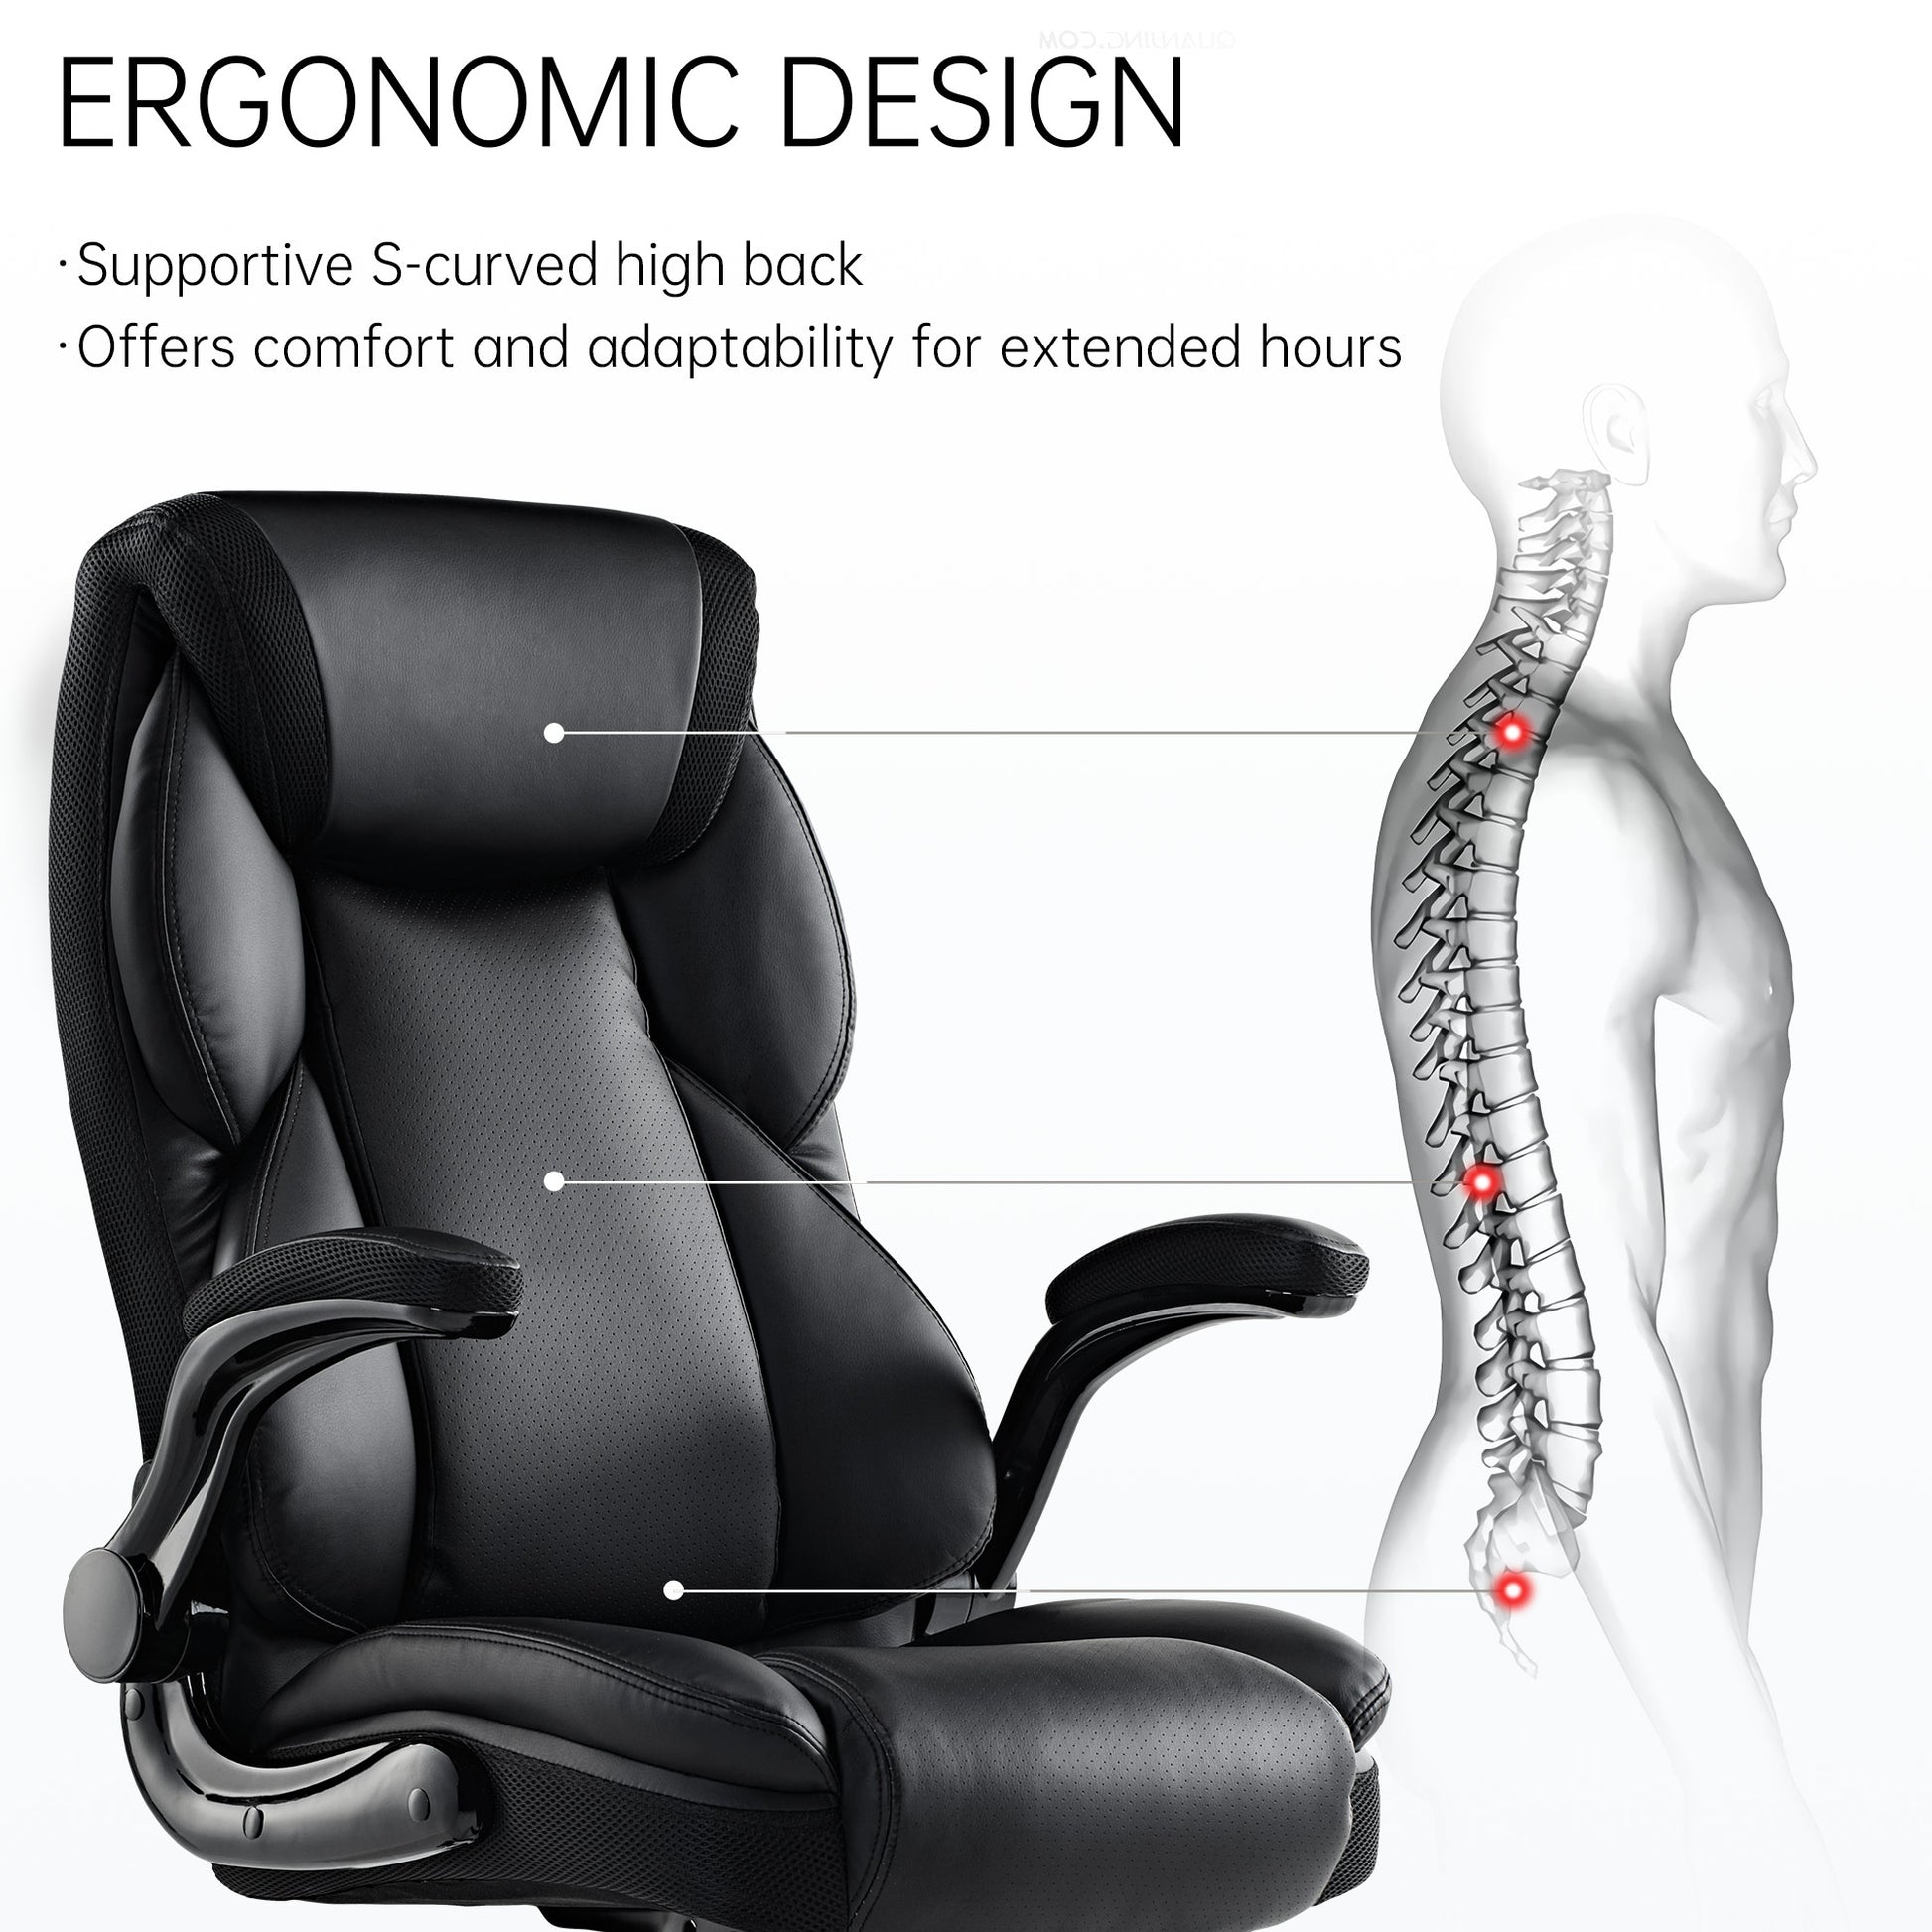 Galene, Home Office Chair, Black, Ergonomic Design, Supportive S-curved high back, Offers comfort and adaptability for extended hours